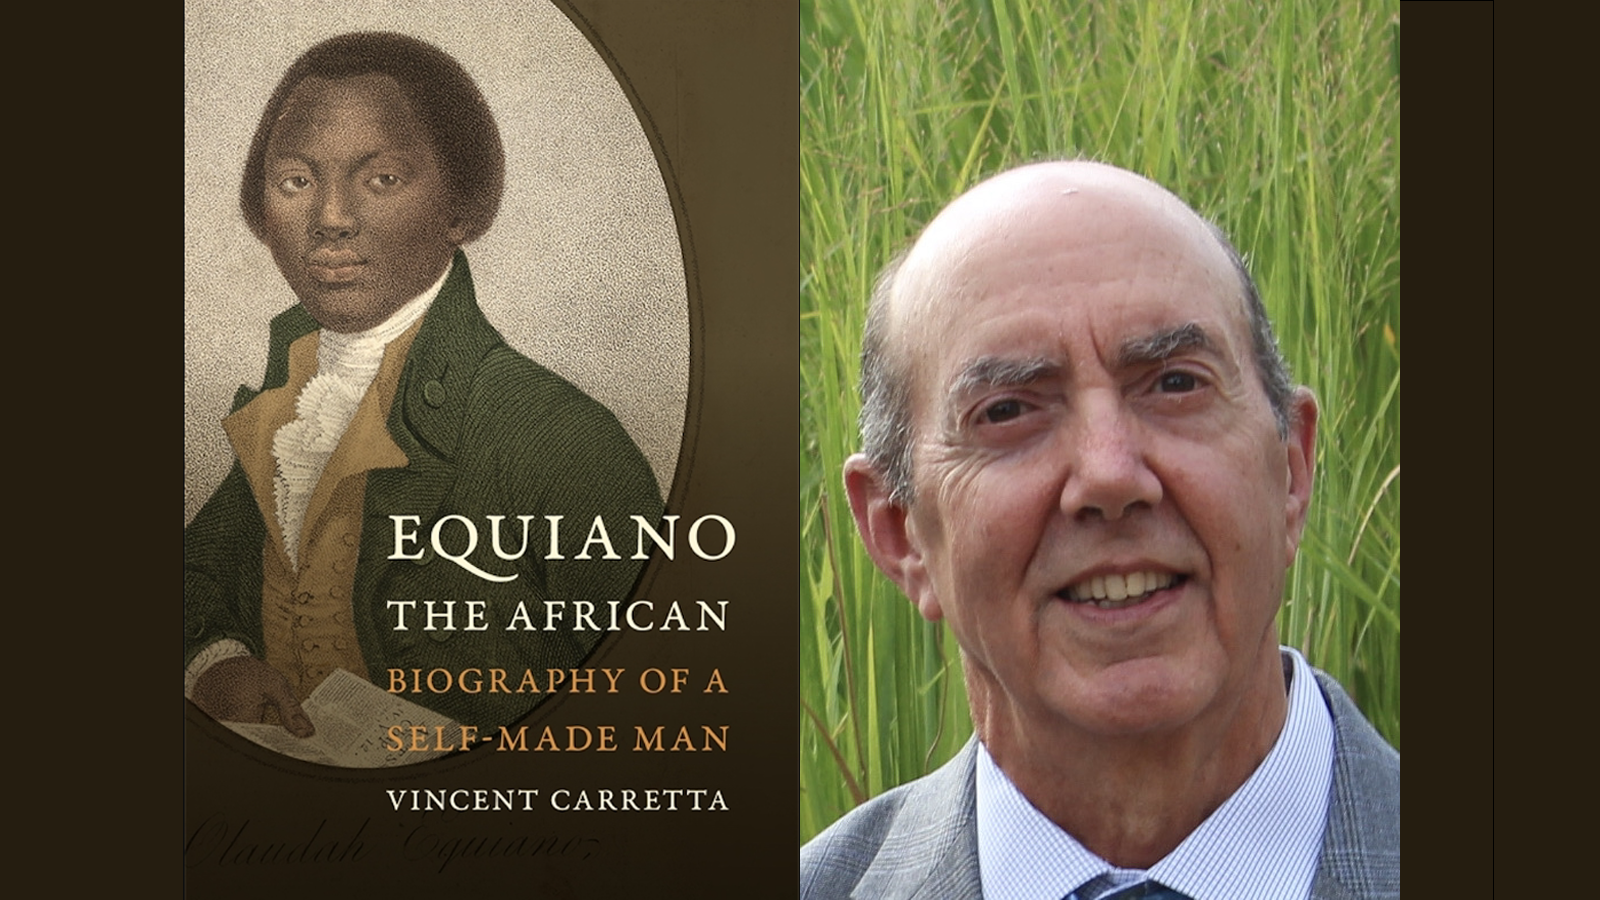 Headshot of Vincent Carretta and Book Cover with image of Olaudah Equiano